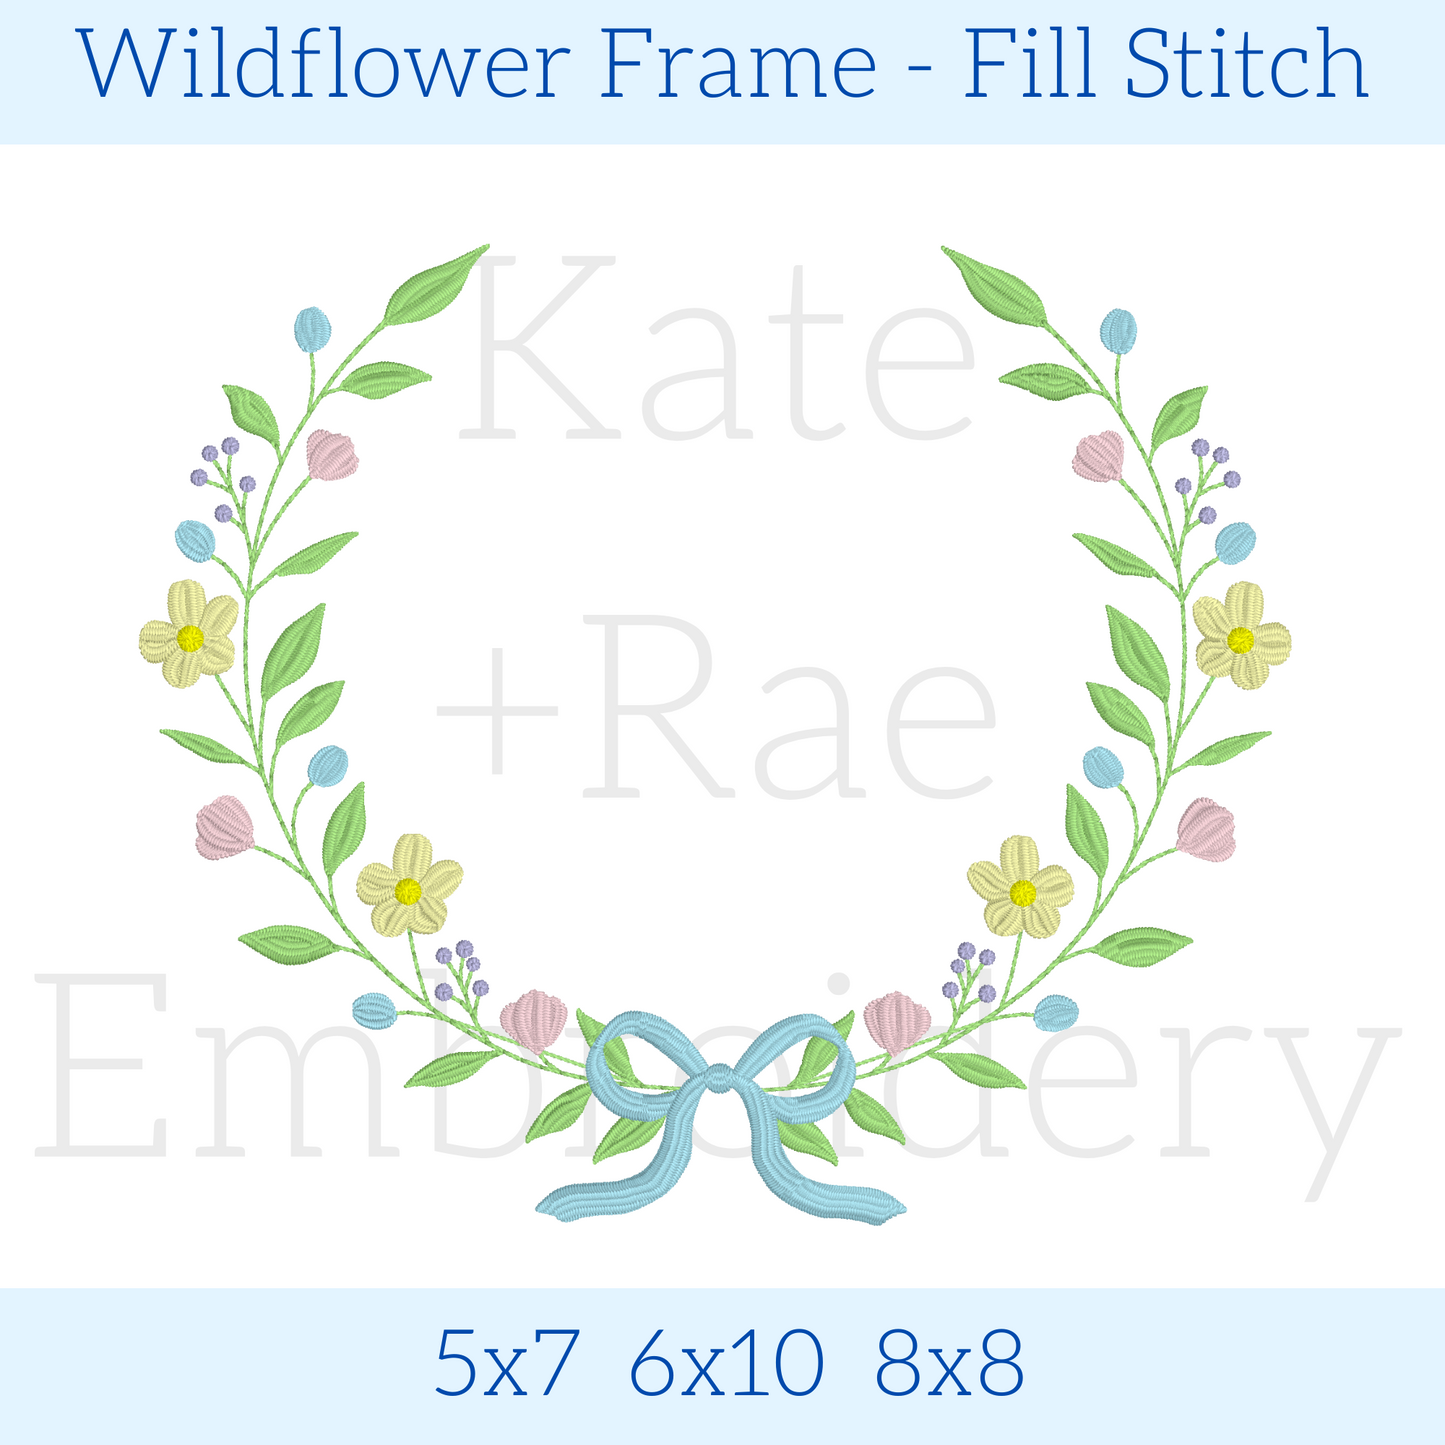 Wildflower Frame Fill Stitch Embroidery Design